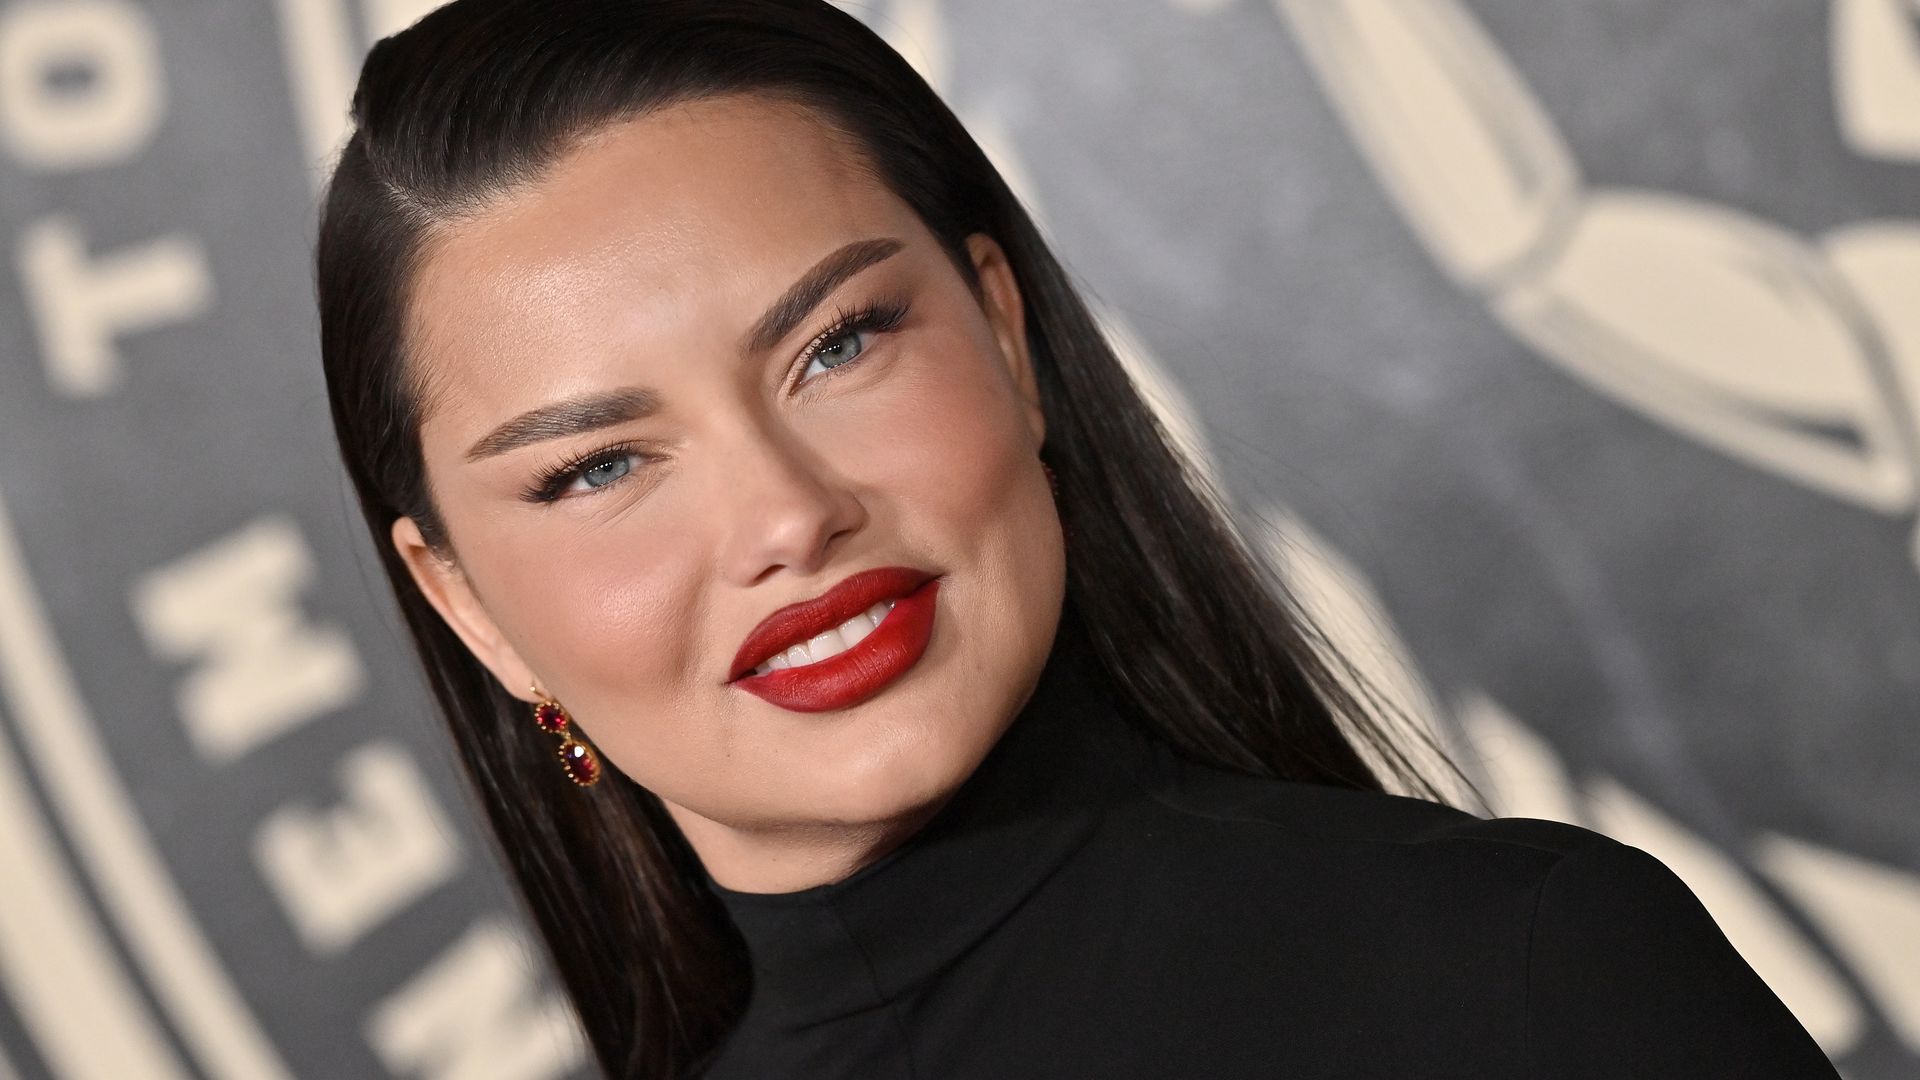 Adriana Lima speaks out after recent ‘unrecognizable’ red carpet appearance